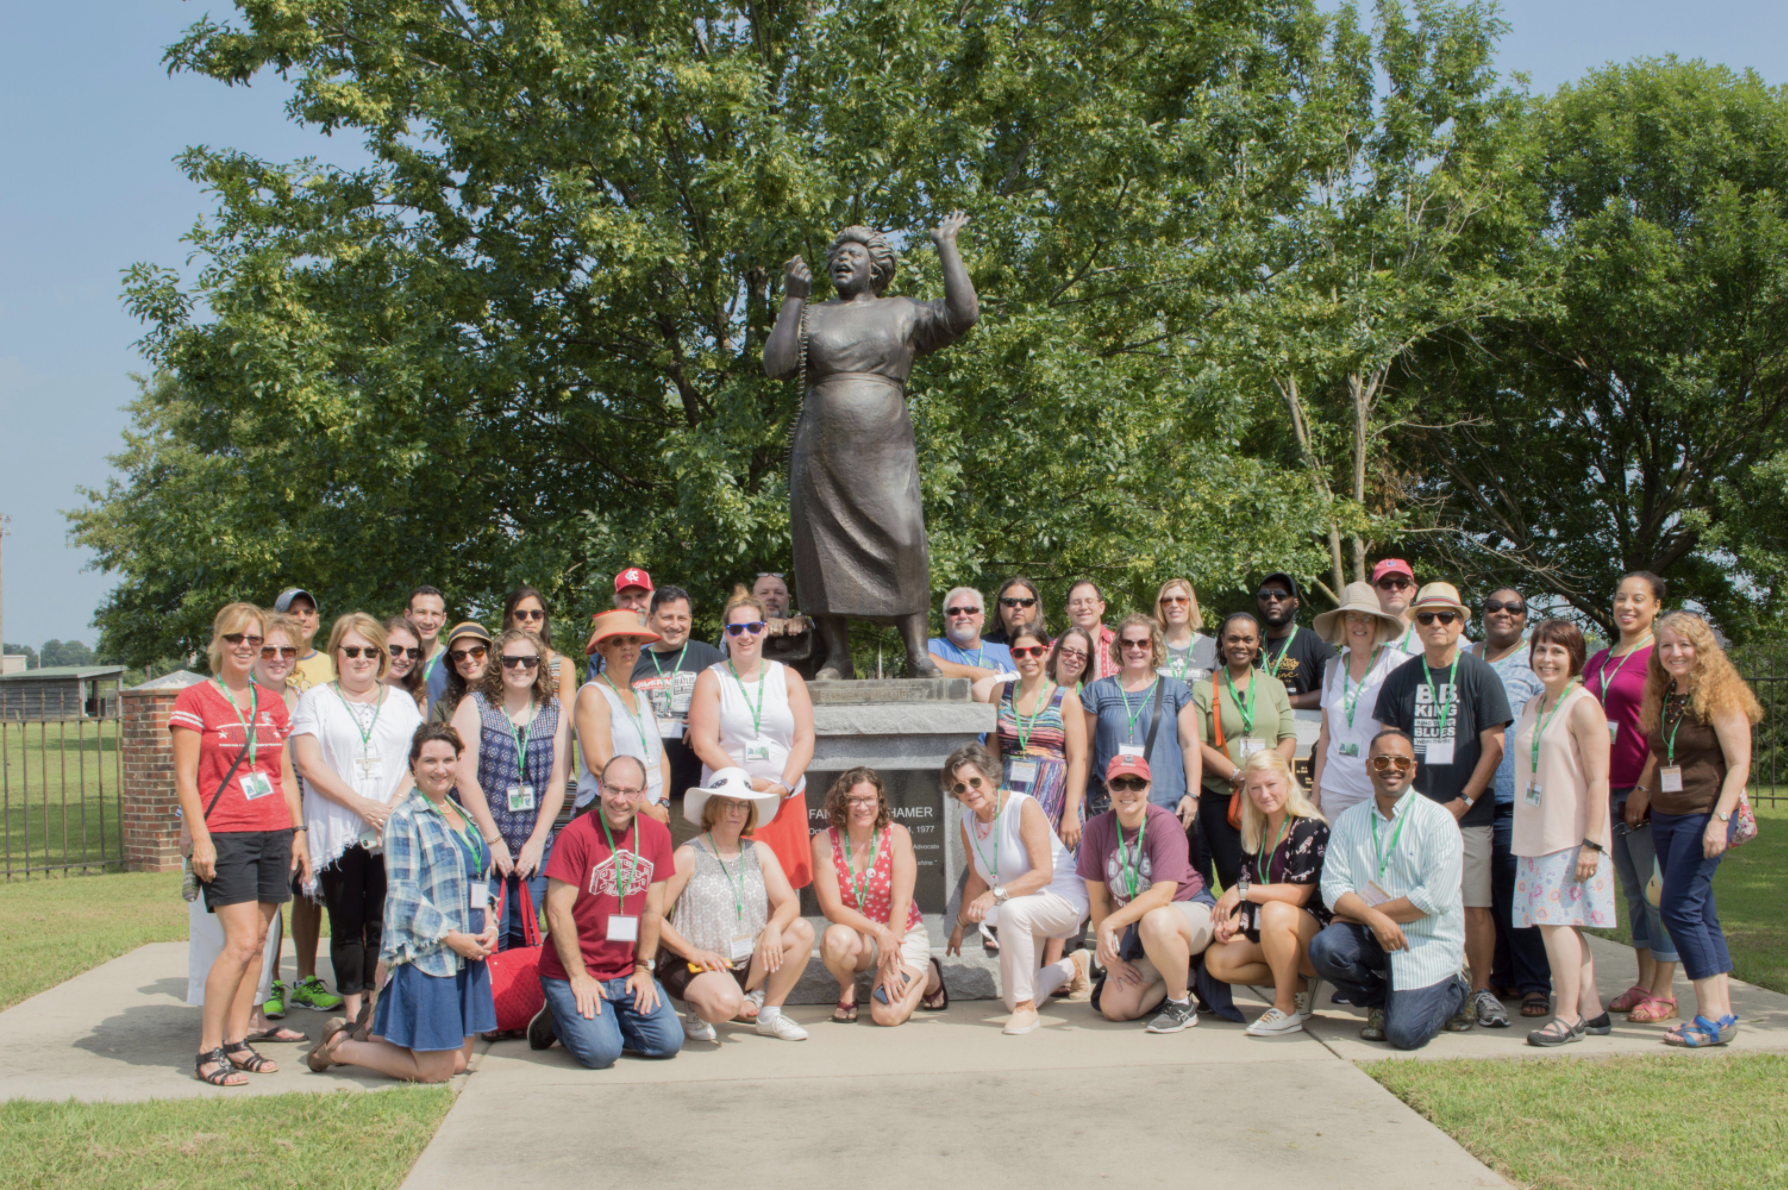 A tour of Mississippi: The Fannie Lou Hamer statue - Mississippi Today